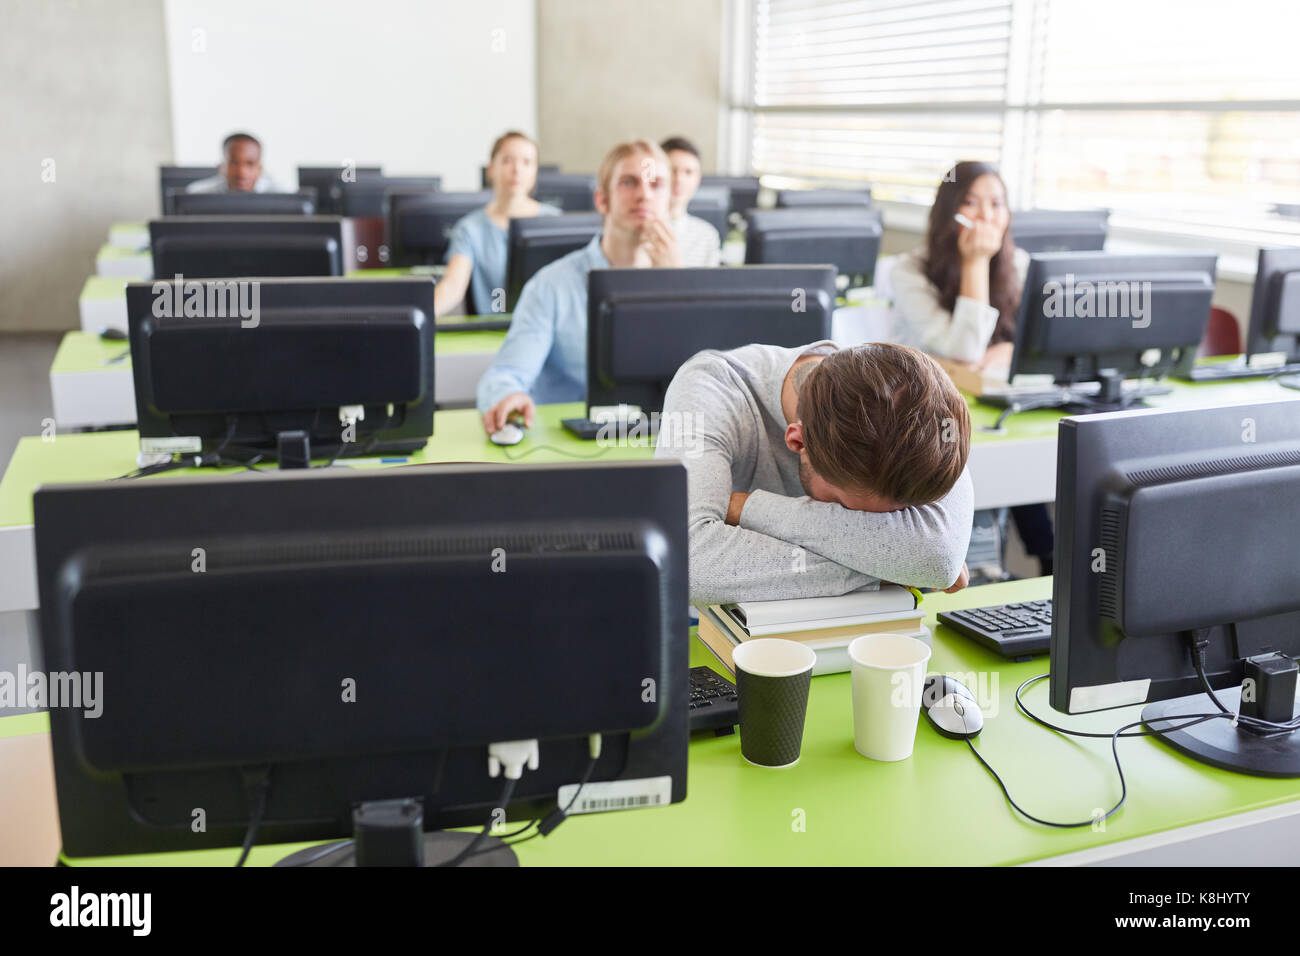 Student with exhaustion or laziness sleeps in class Stock Photo